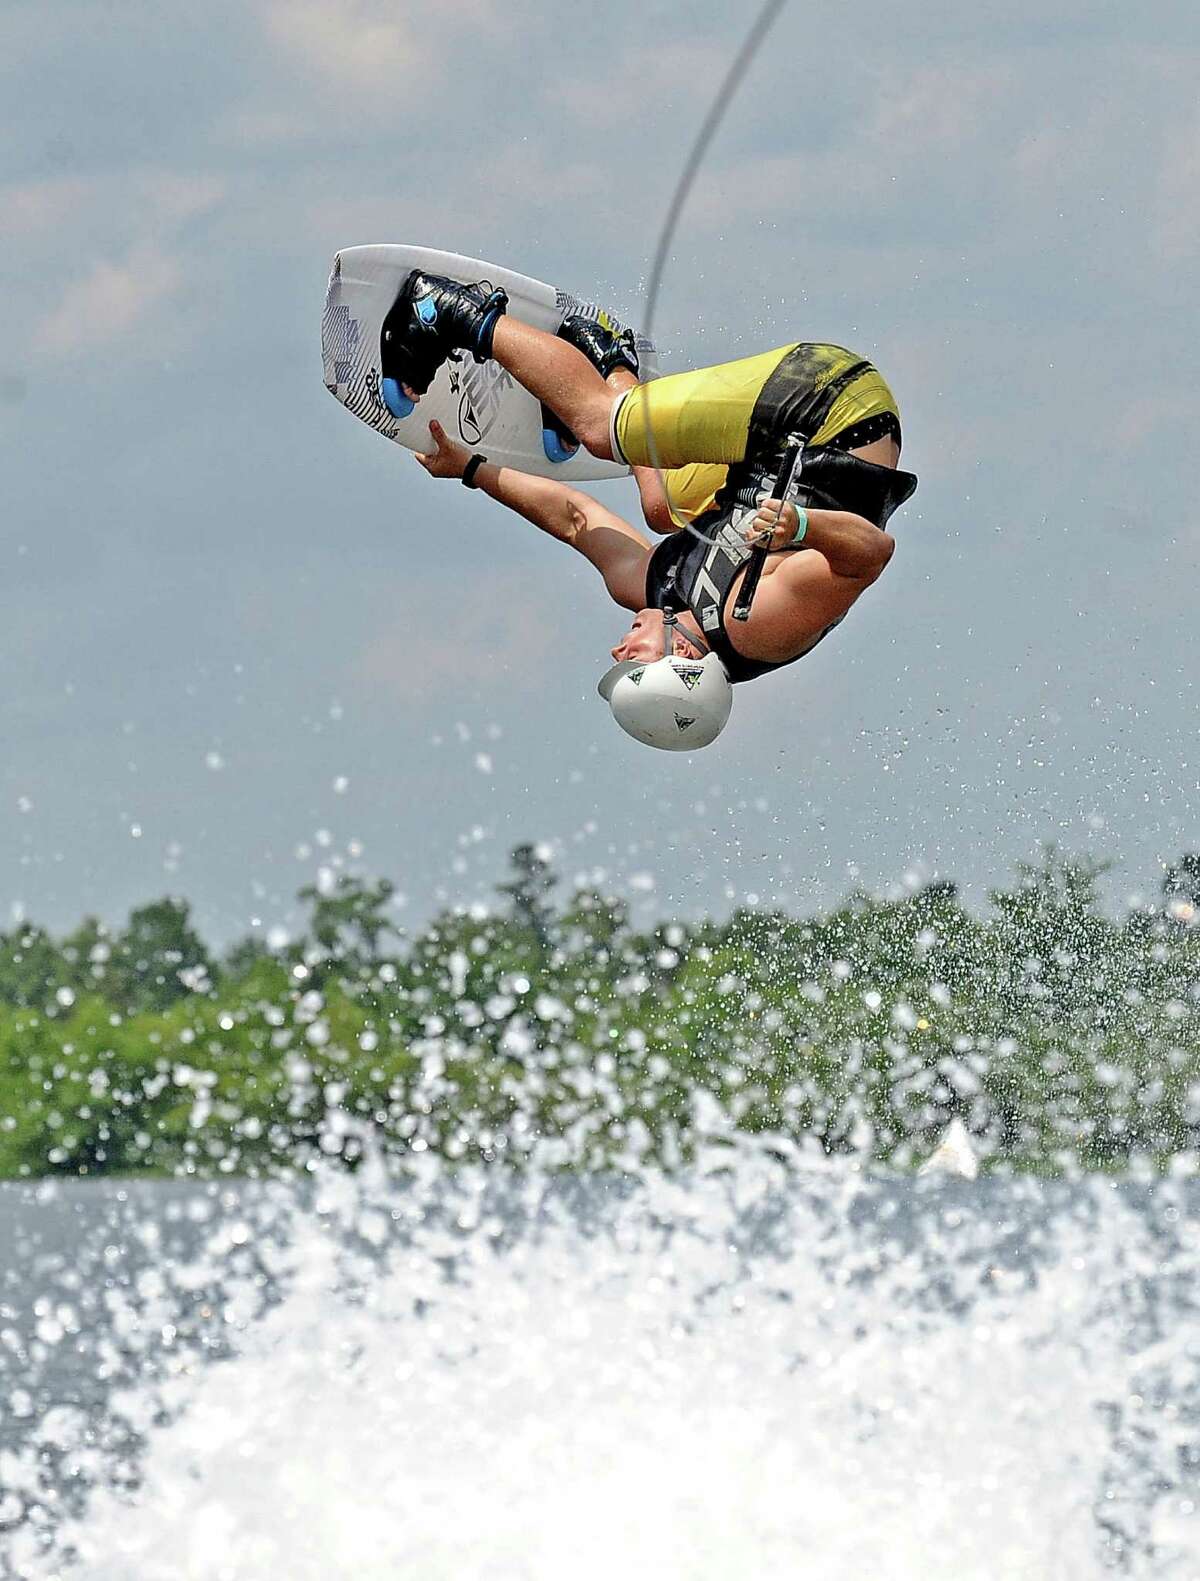 Elliott Dollar competes in the SETx Mid Summer Classic wake boarding event in Rose City on Saturday, June 8, 2013. Photo taken: Randy Edwards/The Enterprise